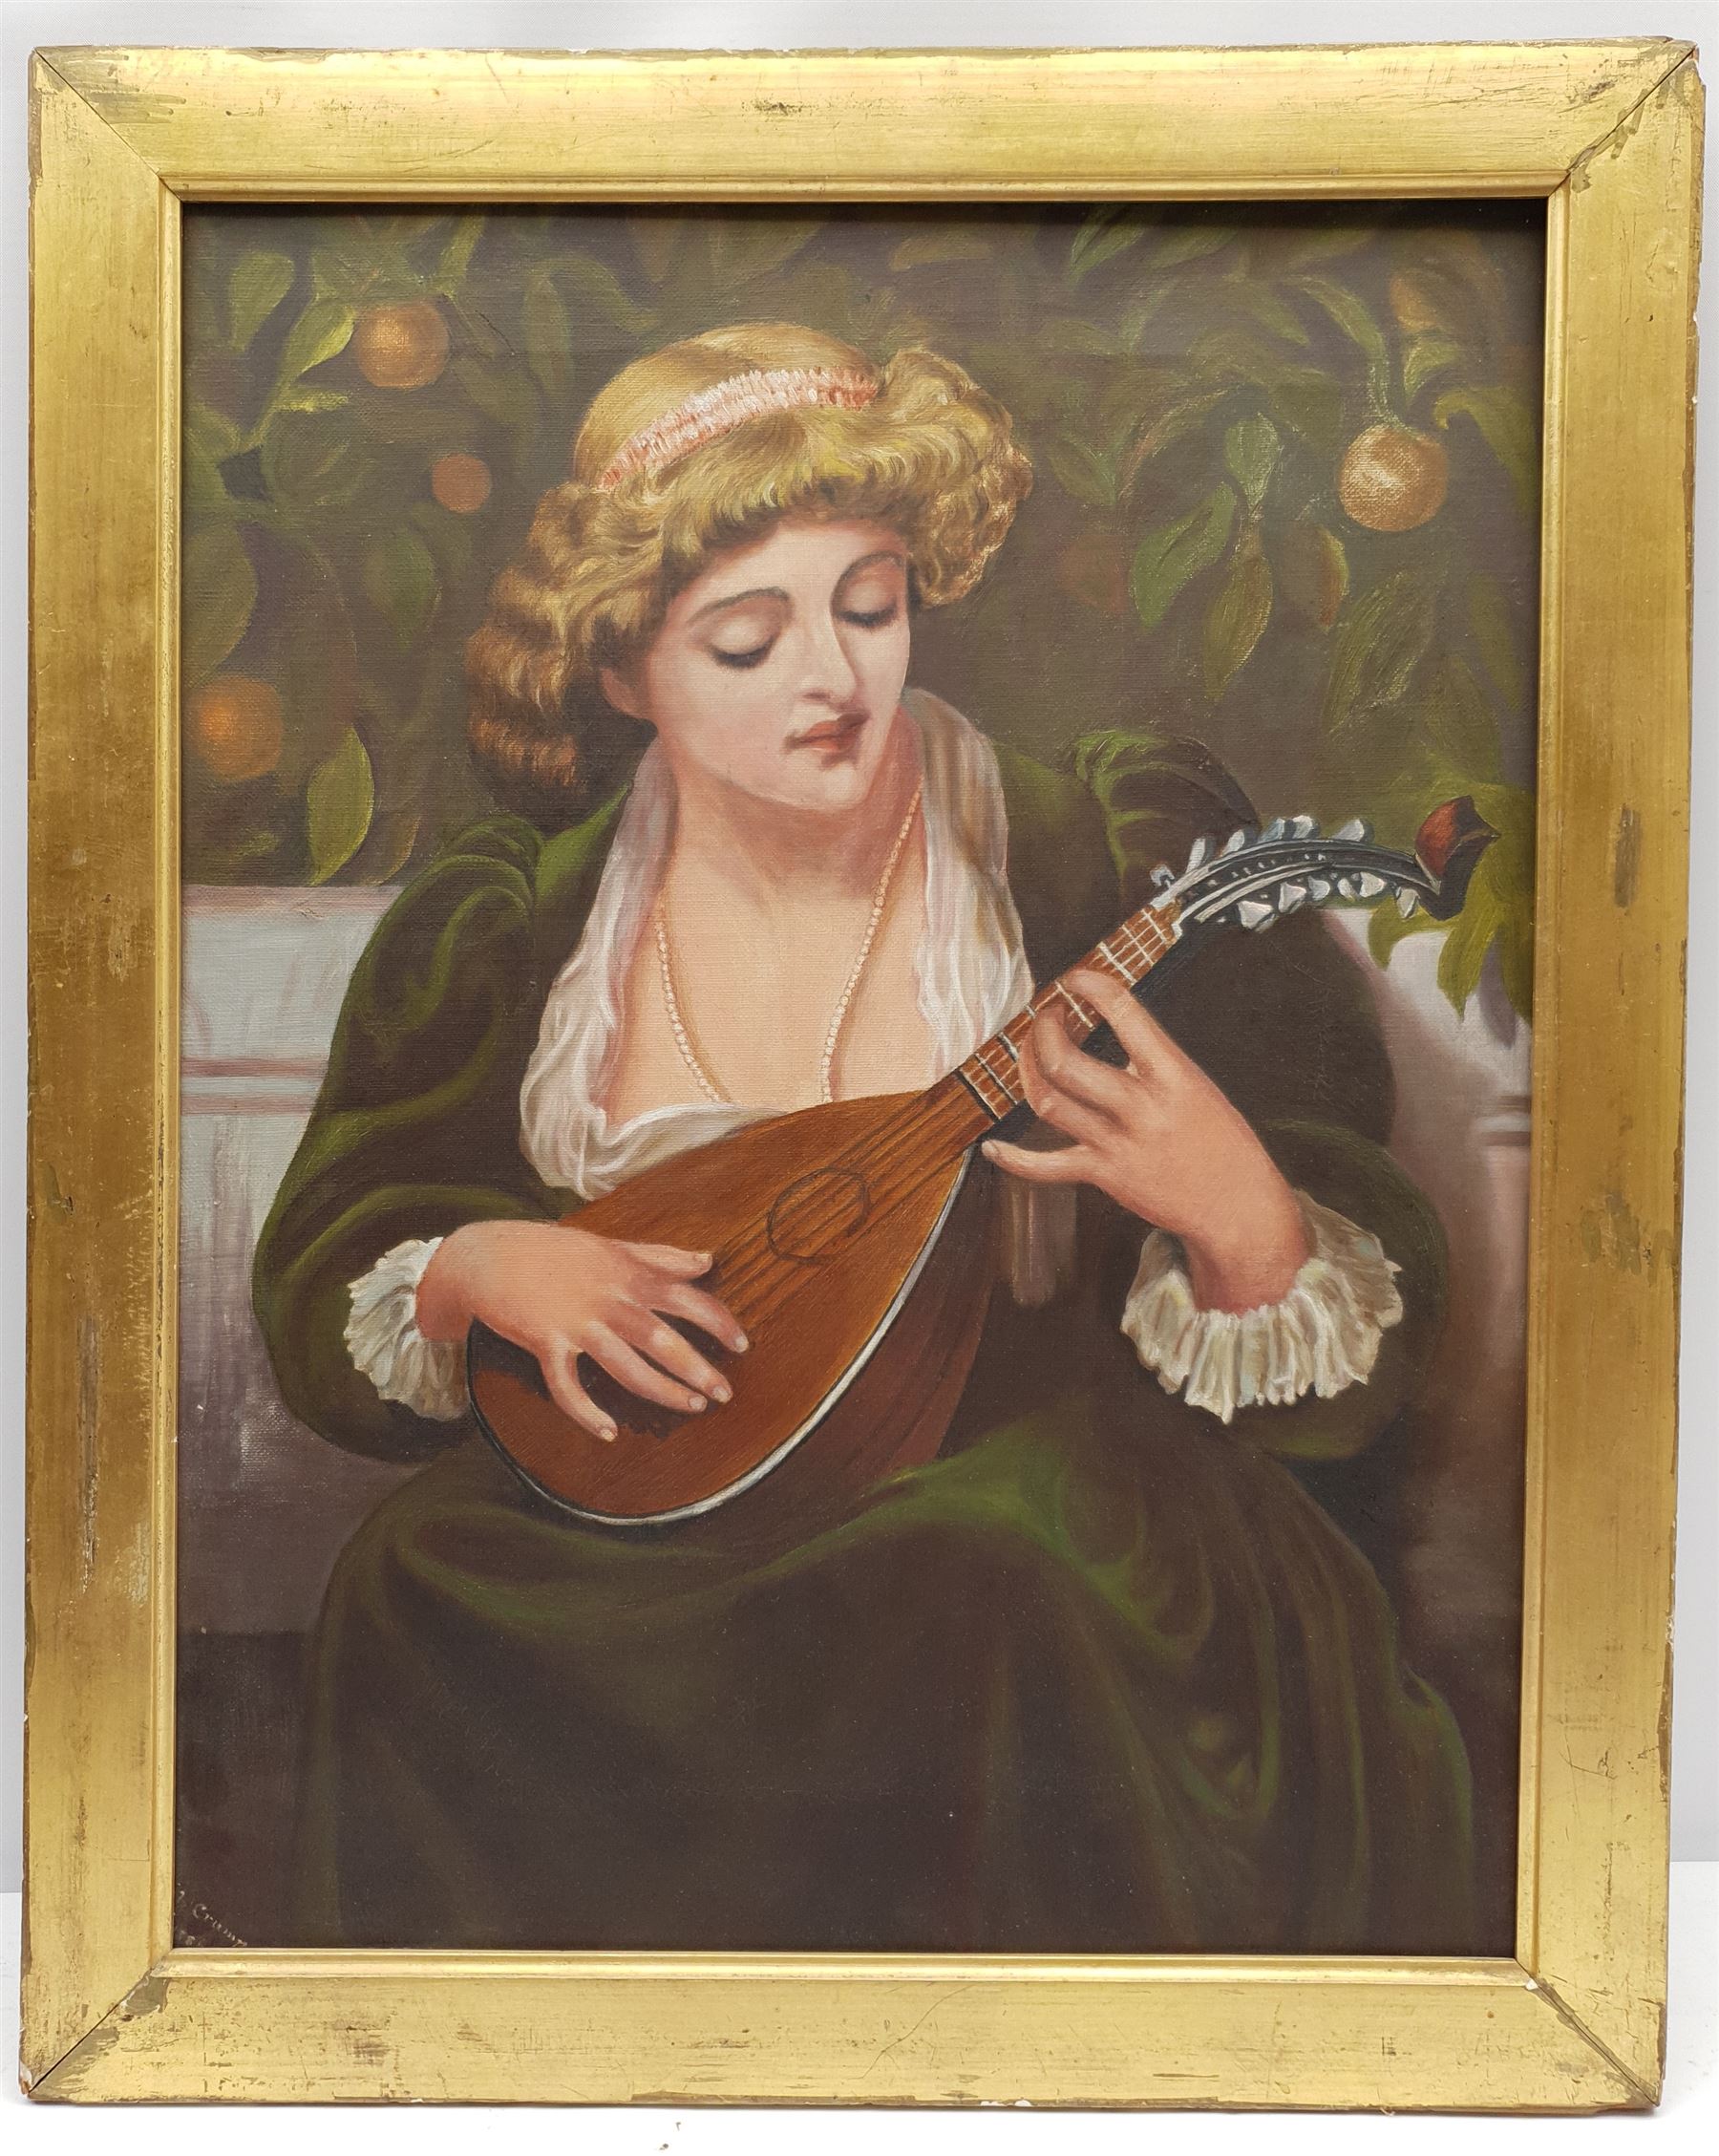 Cramp (19th century): Lady Playing a Lute - Image 2 of 2